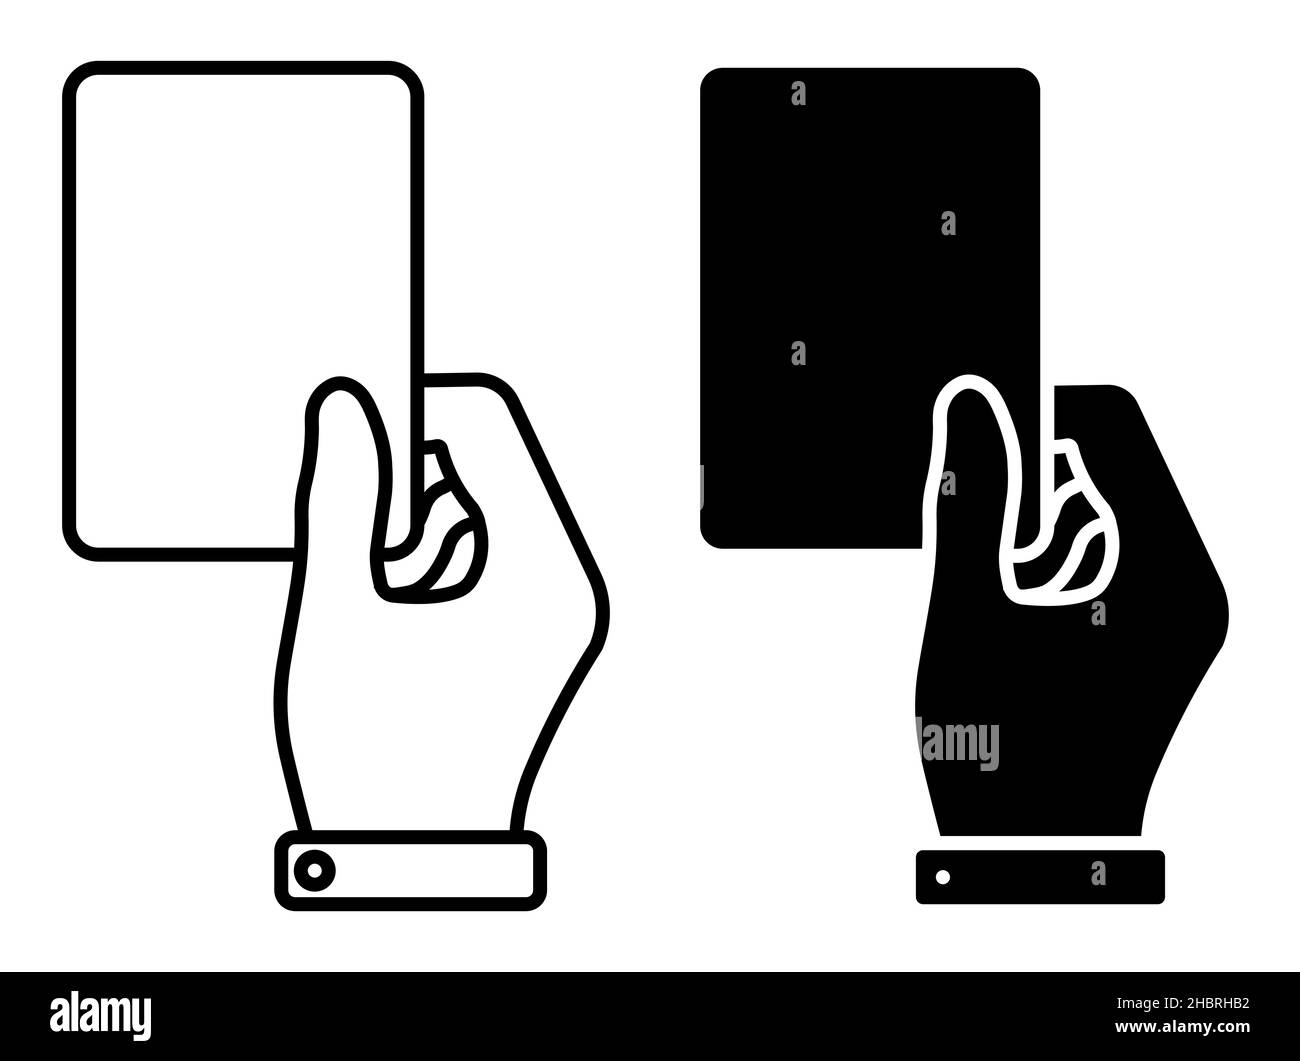 Linear icon. Sports referee hand showing card for player breaking rules. Sports team game of soccer, football. Simple black and white vector isolated Stock Vector